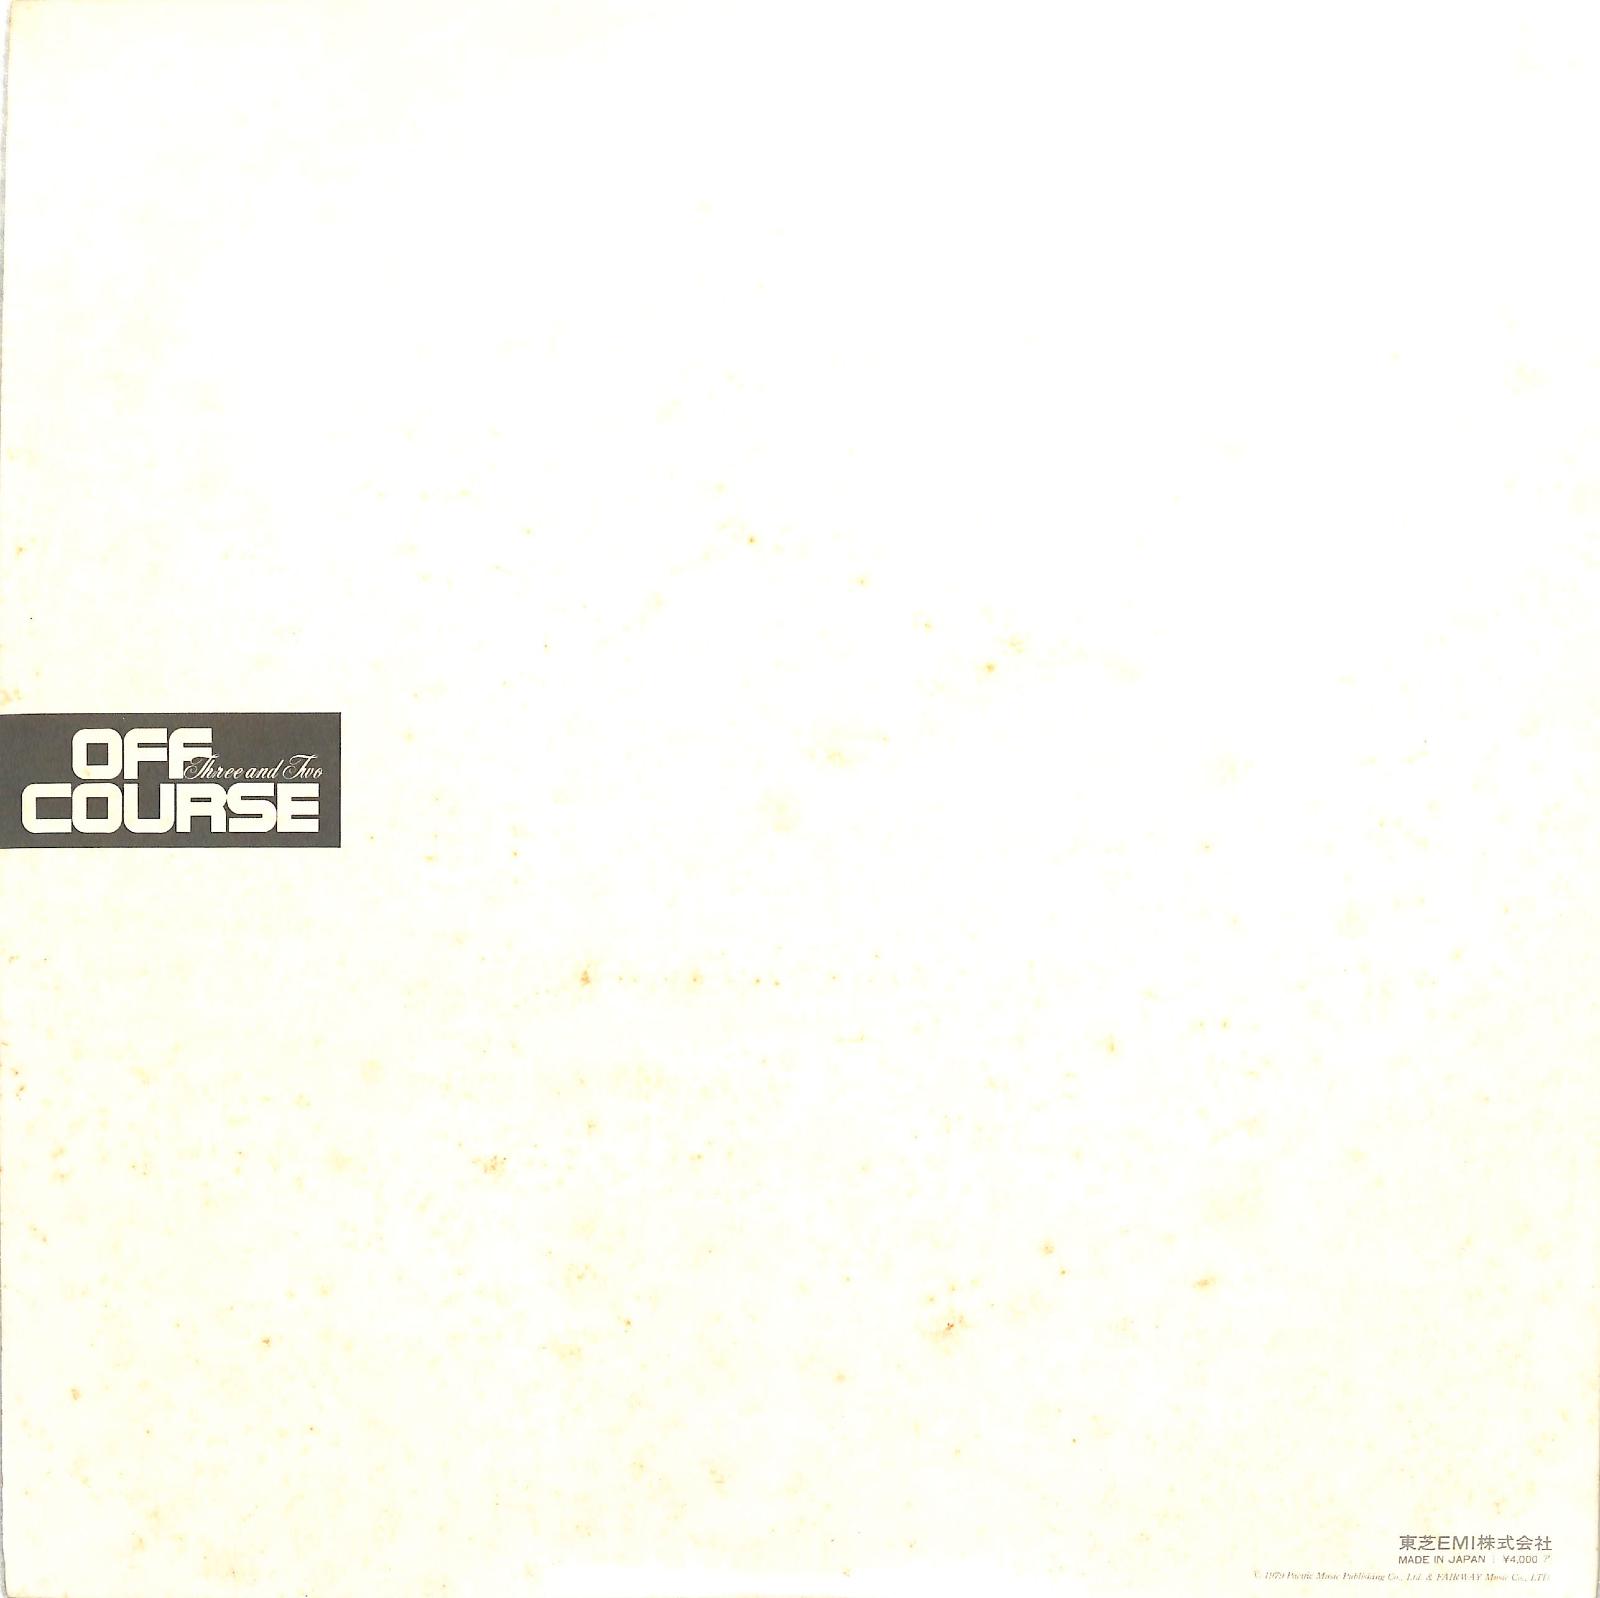 OFF COURSE - Live